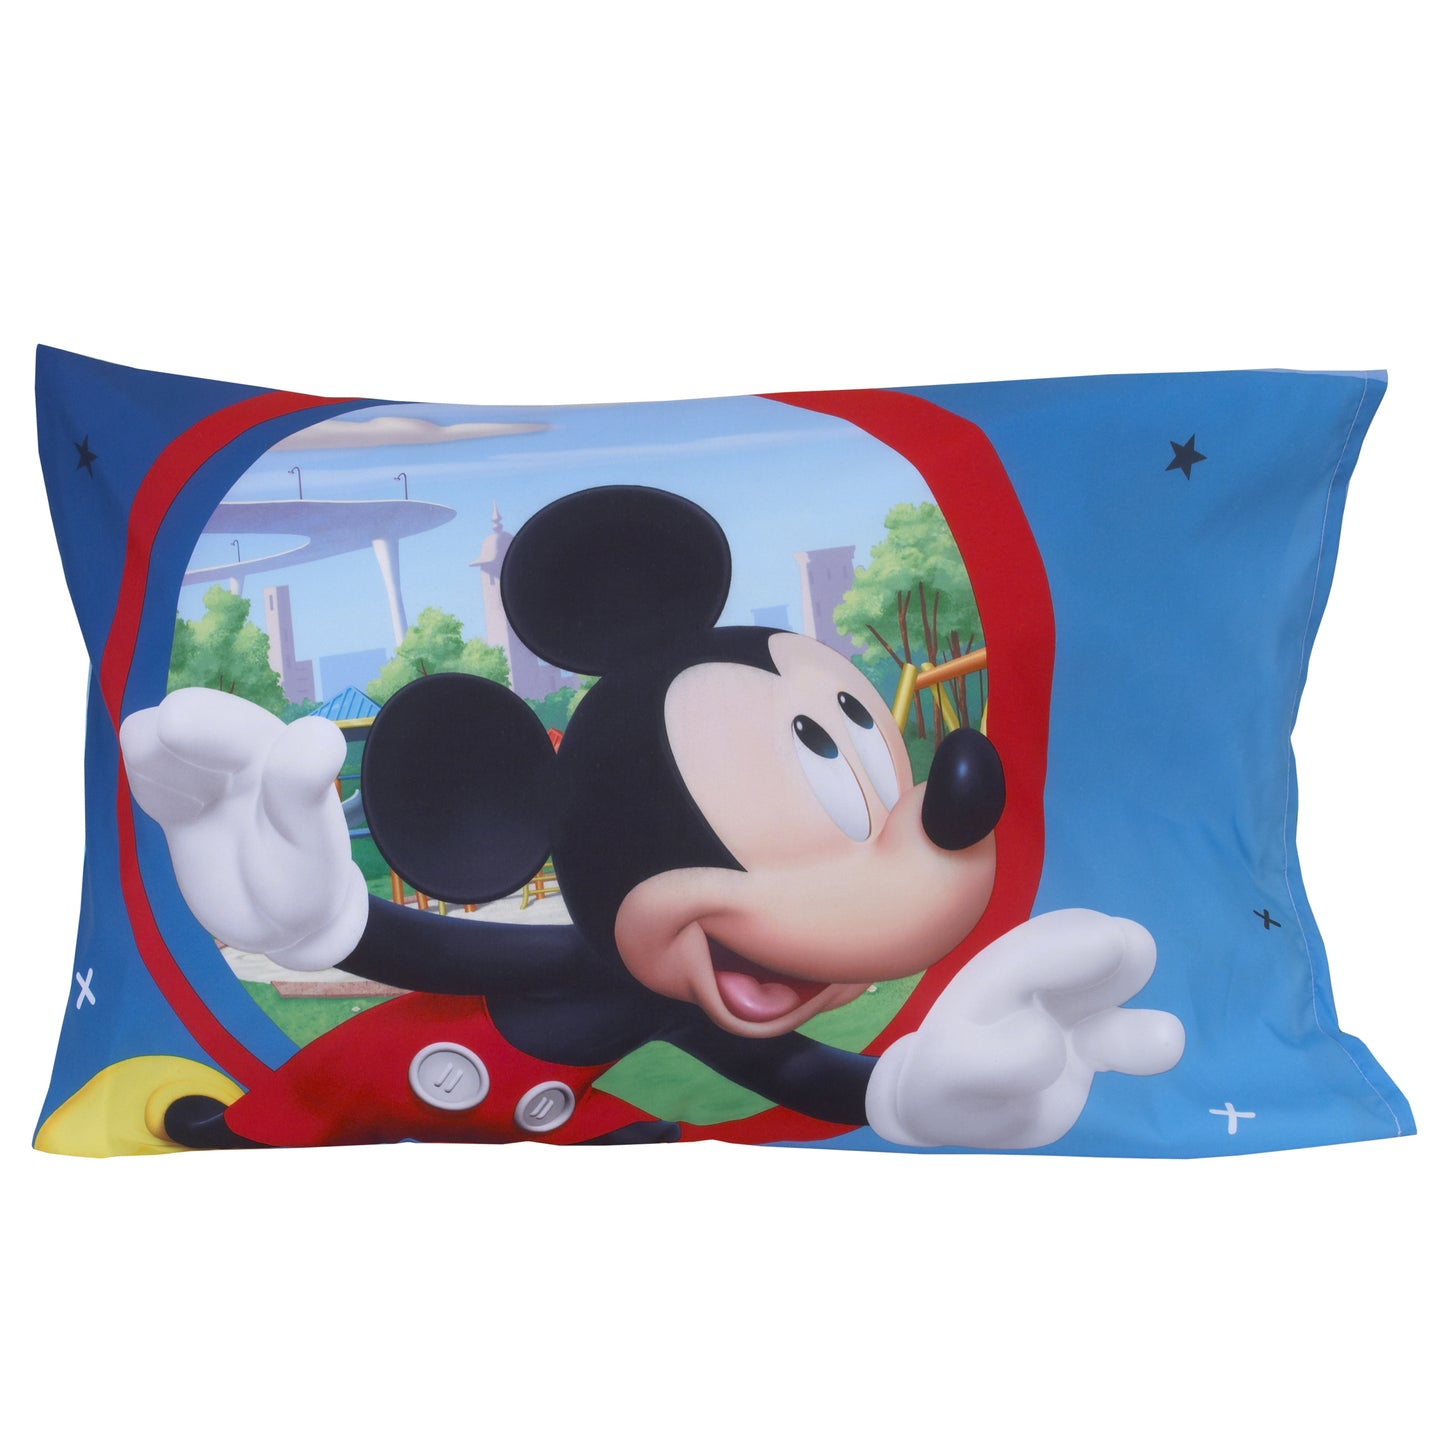 Disney Mickey Mouse Playhouse 4 Piece Toddler Bed Set